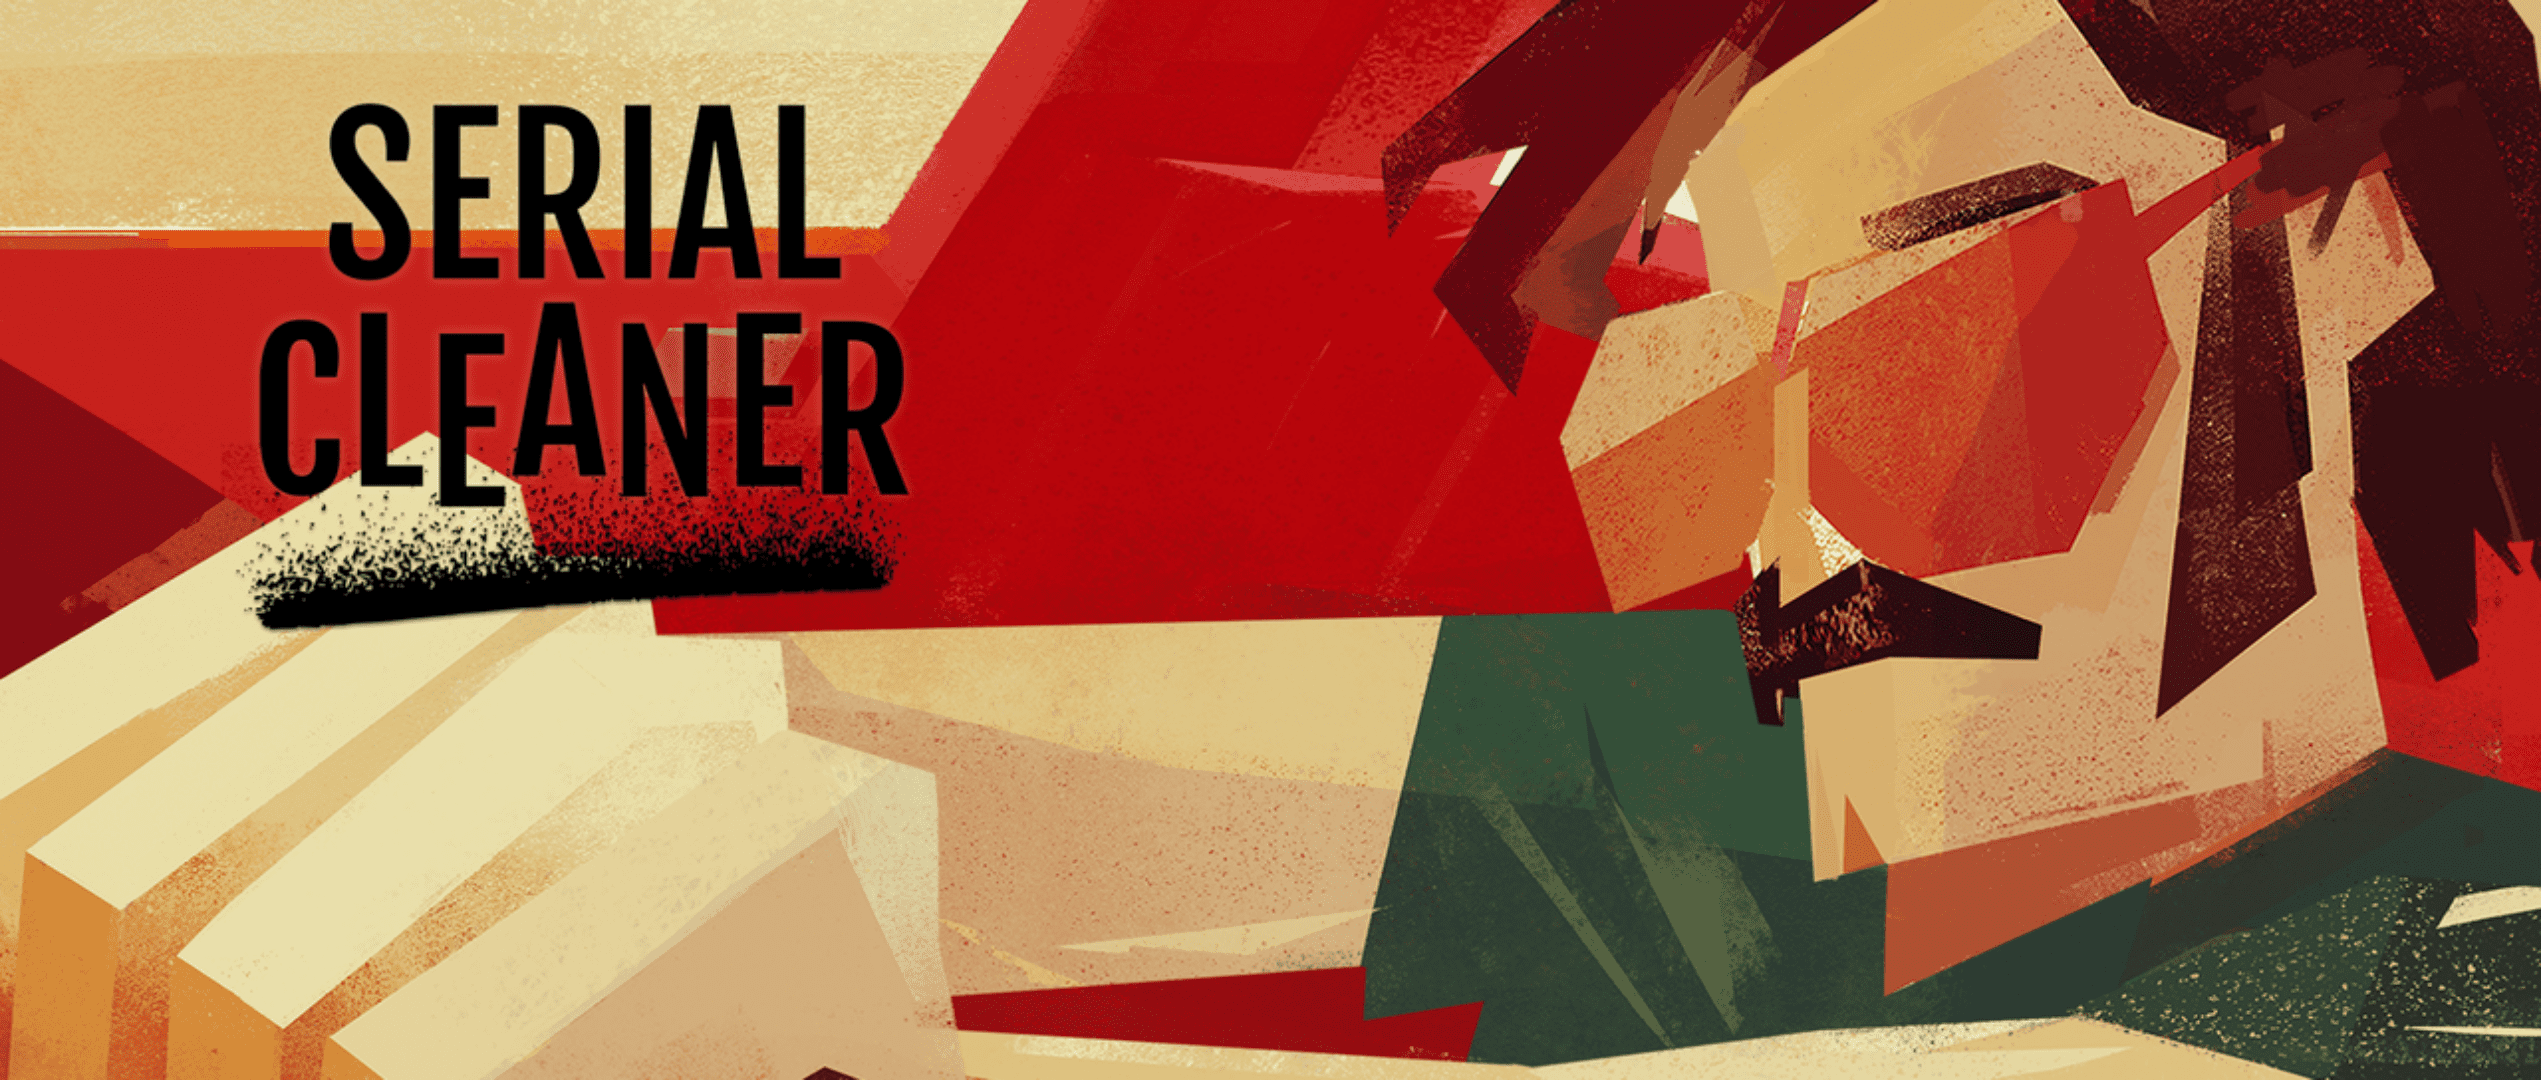 Serial Cleaner Is A Quirky Game About Murder Where You Don’t Murder Anyone